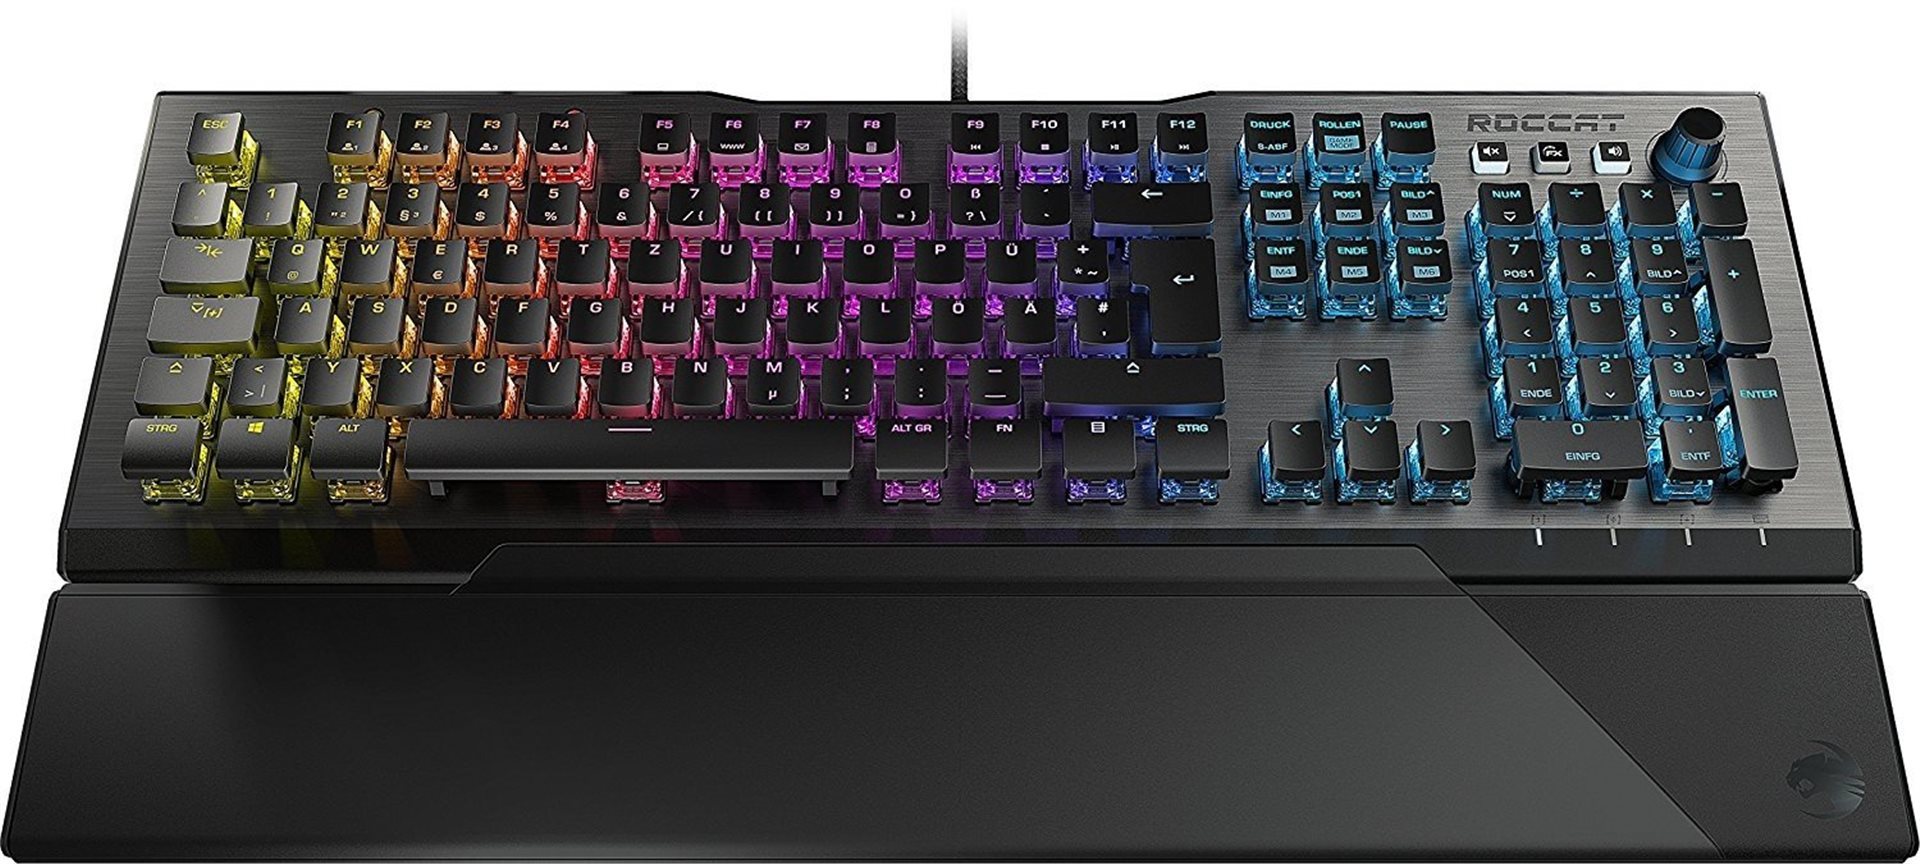 VULCAN 120 AIMO, Tactile, silent Switch, US Layou